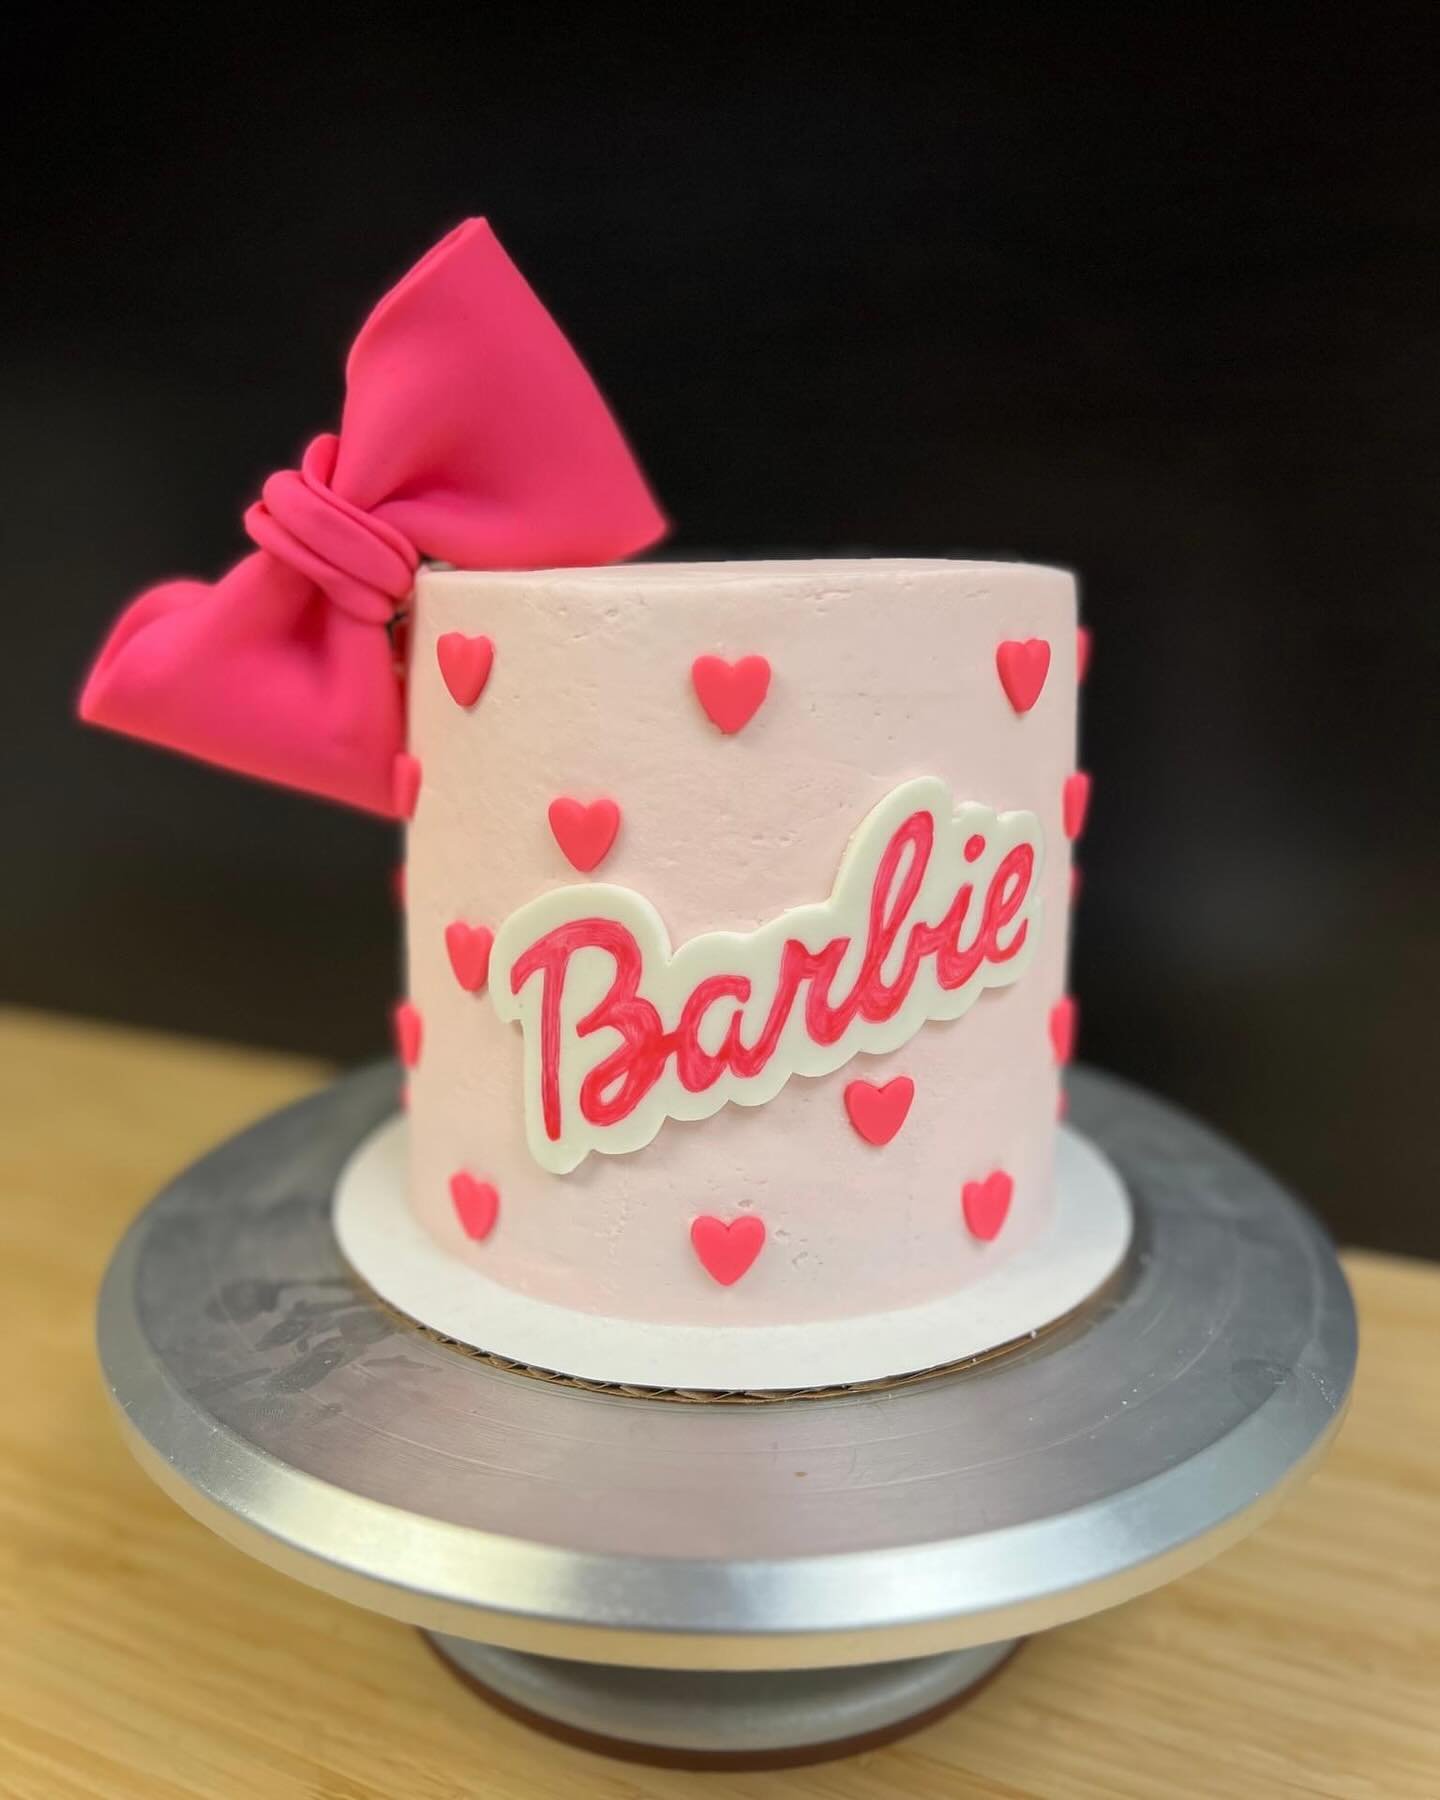 Come on Barbie, let&rsquo;s go party! 🩷💅
Message us for all of your cake needs!

 #johnsonvillecakes #cakesofwacotexas #cakesofmcgregortexas #cakesofwaco #birthdaycakesofwaco #cakesofmcgregor #wacocakes #barbiecake #comeonbarbieletsgoparty